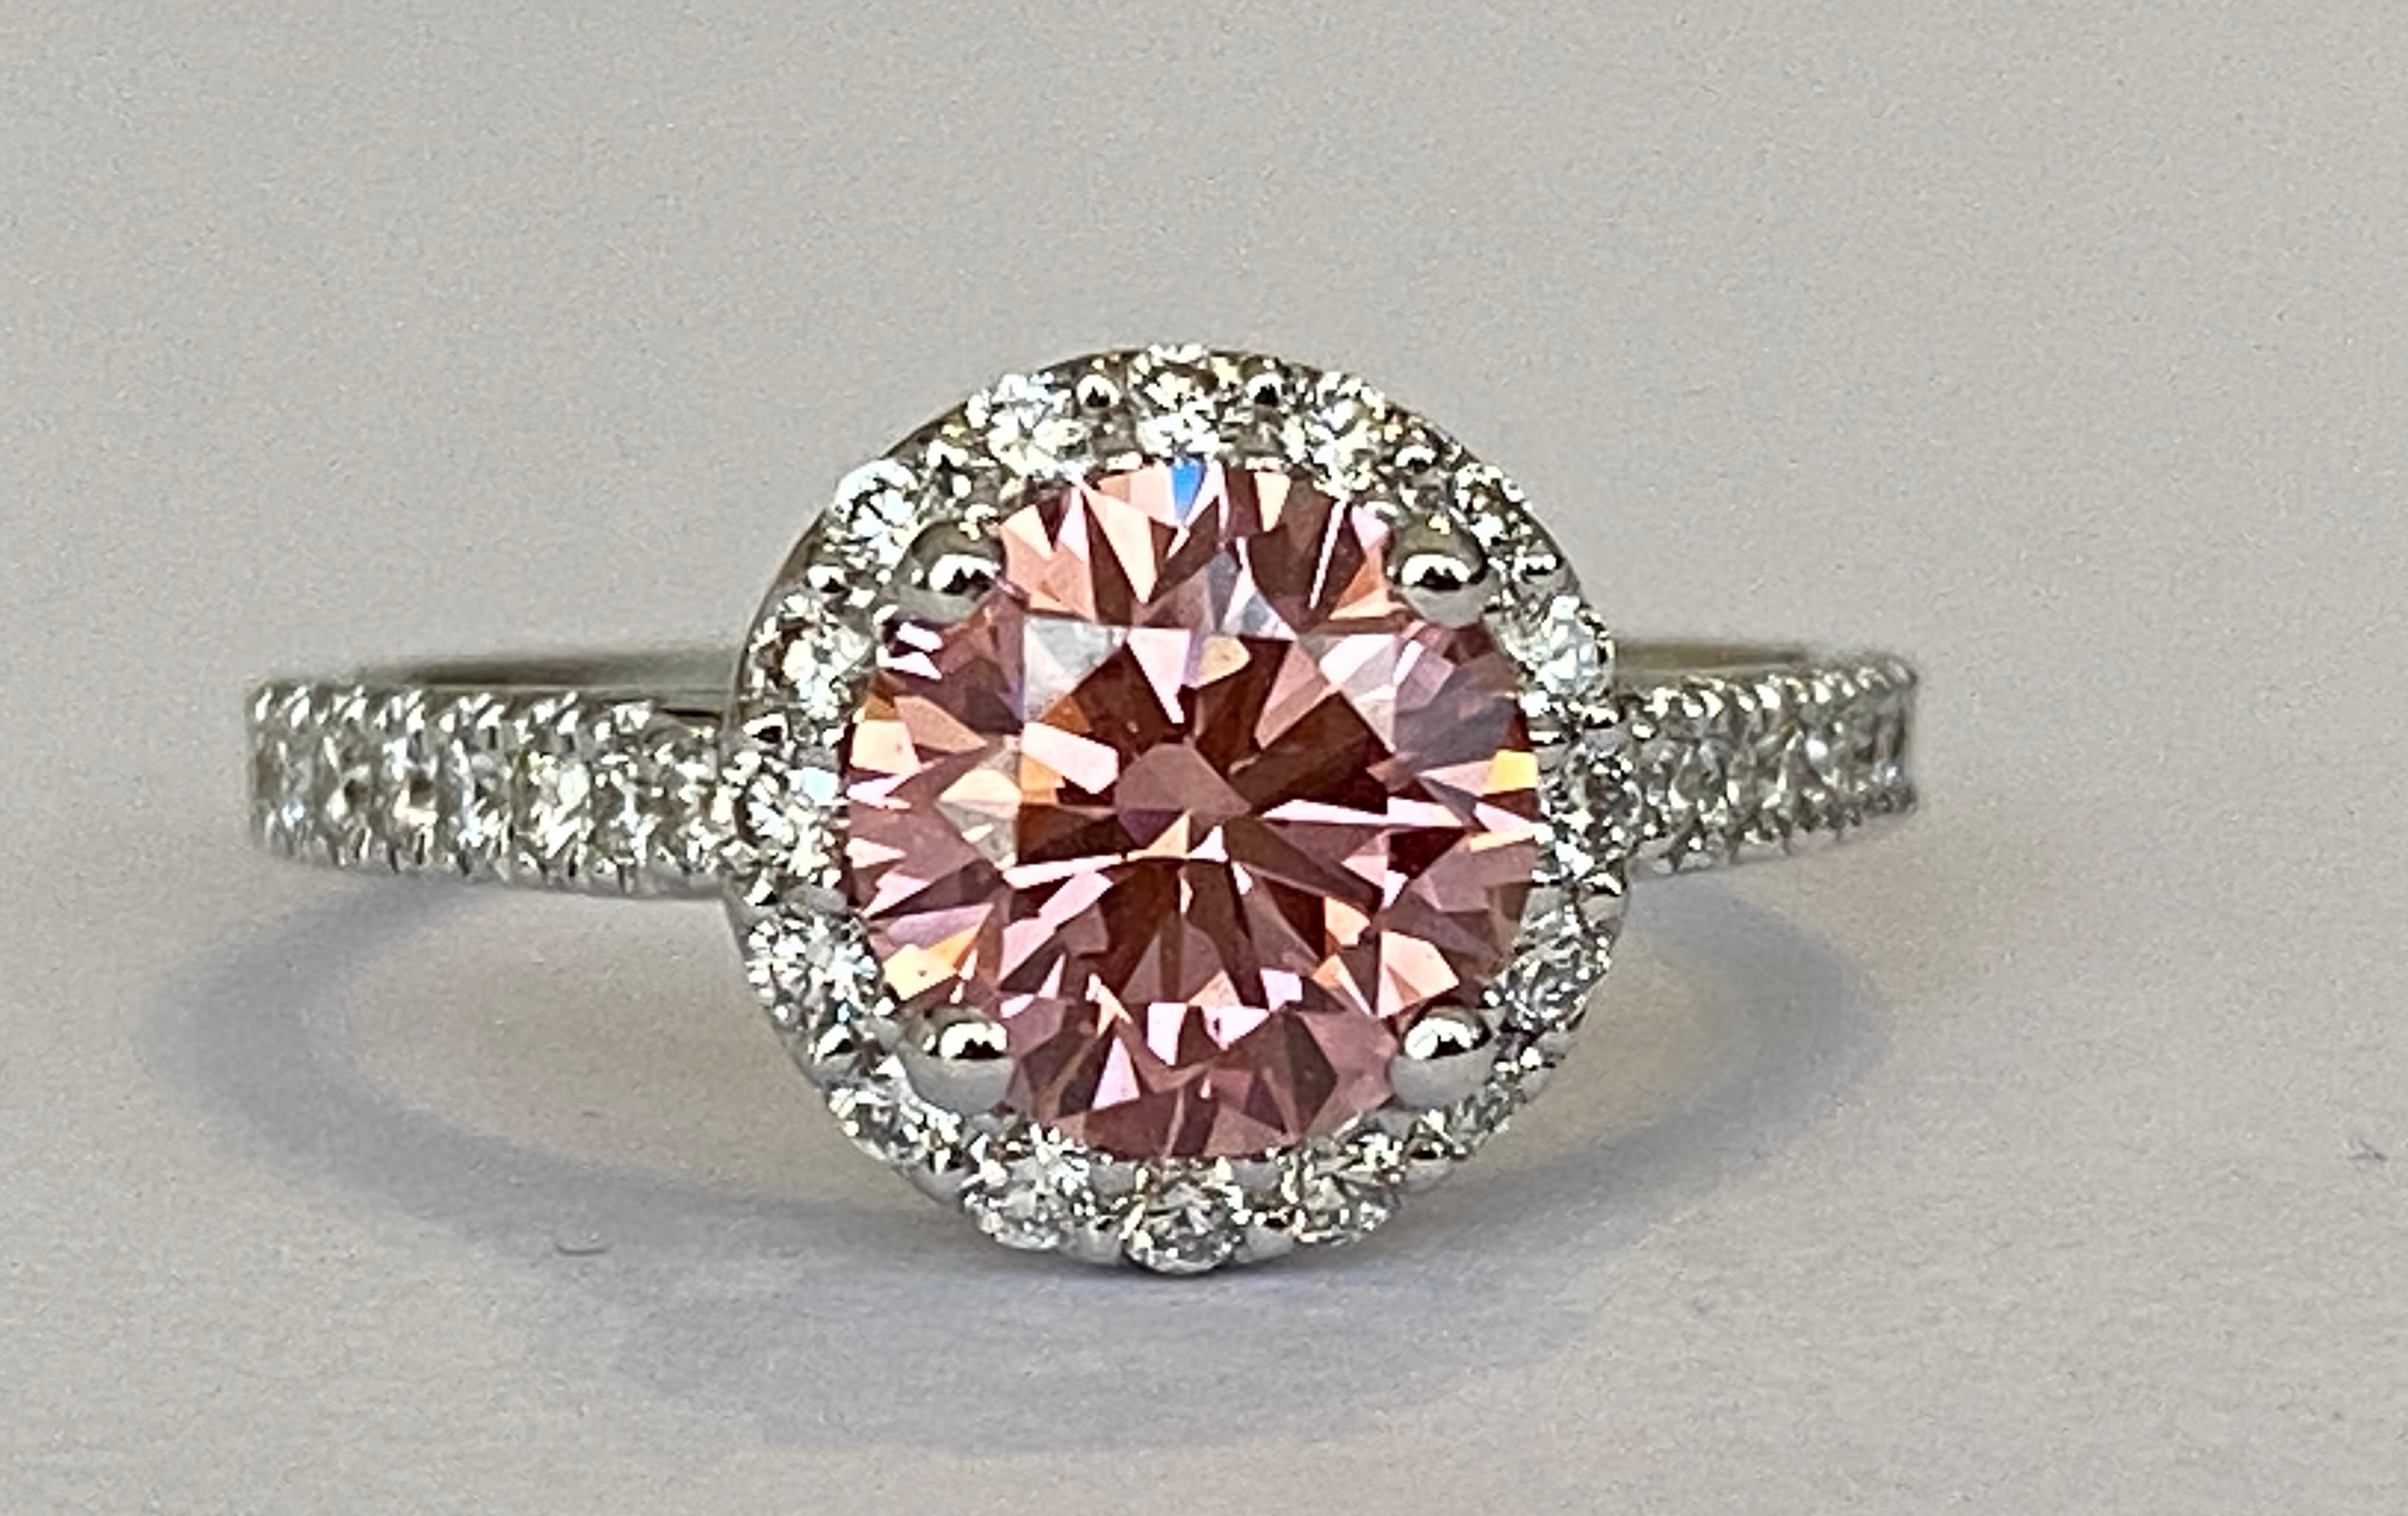 Brilliant Cut IGI Certified Diamond Engagement Ring VS1 1.51crt Pink Lab Created, 18 kt Gold For Sale